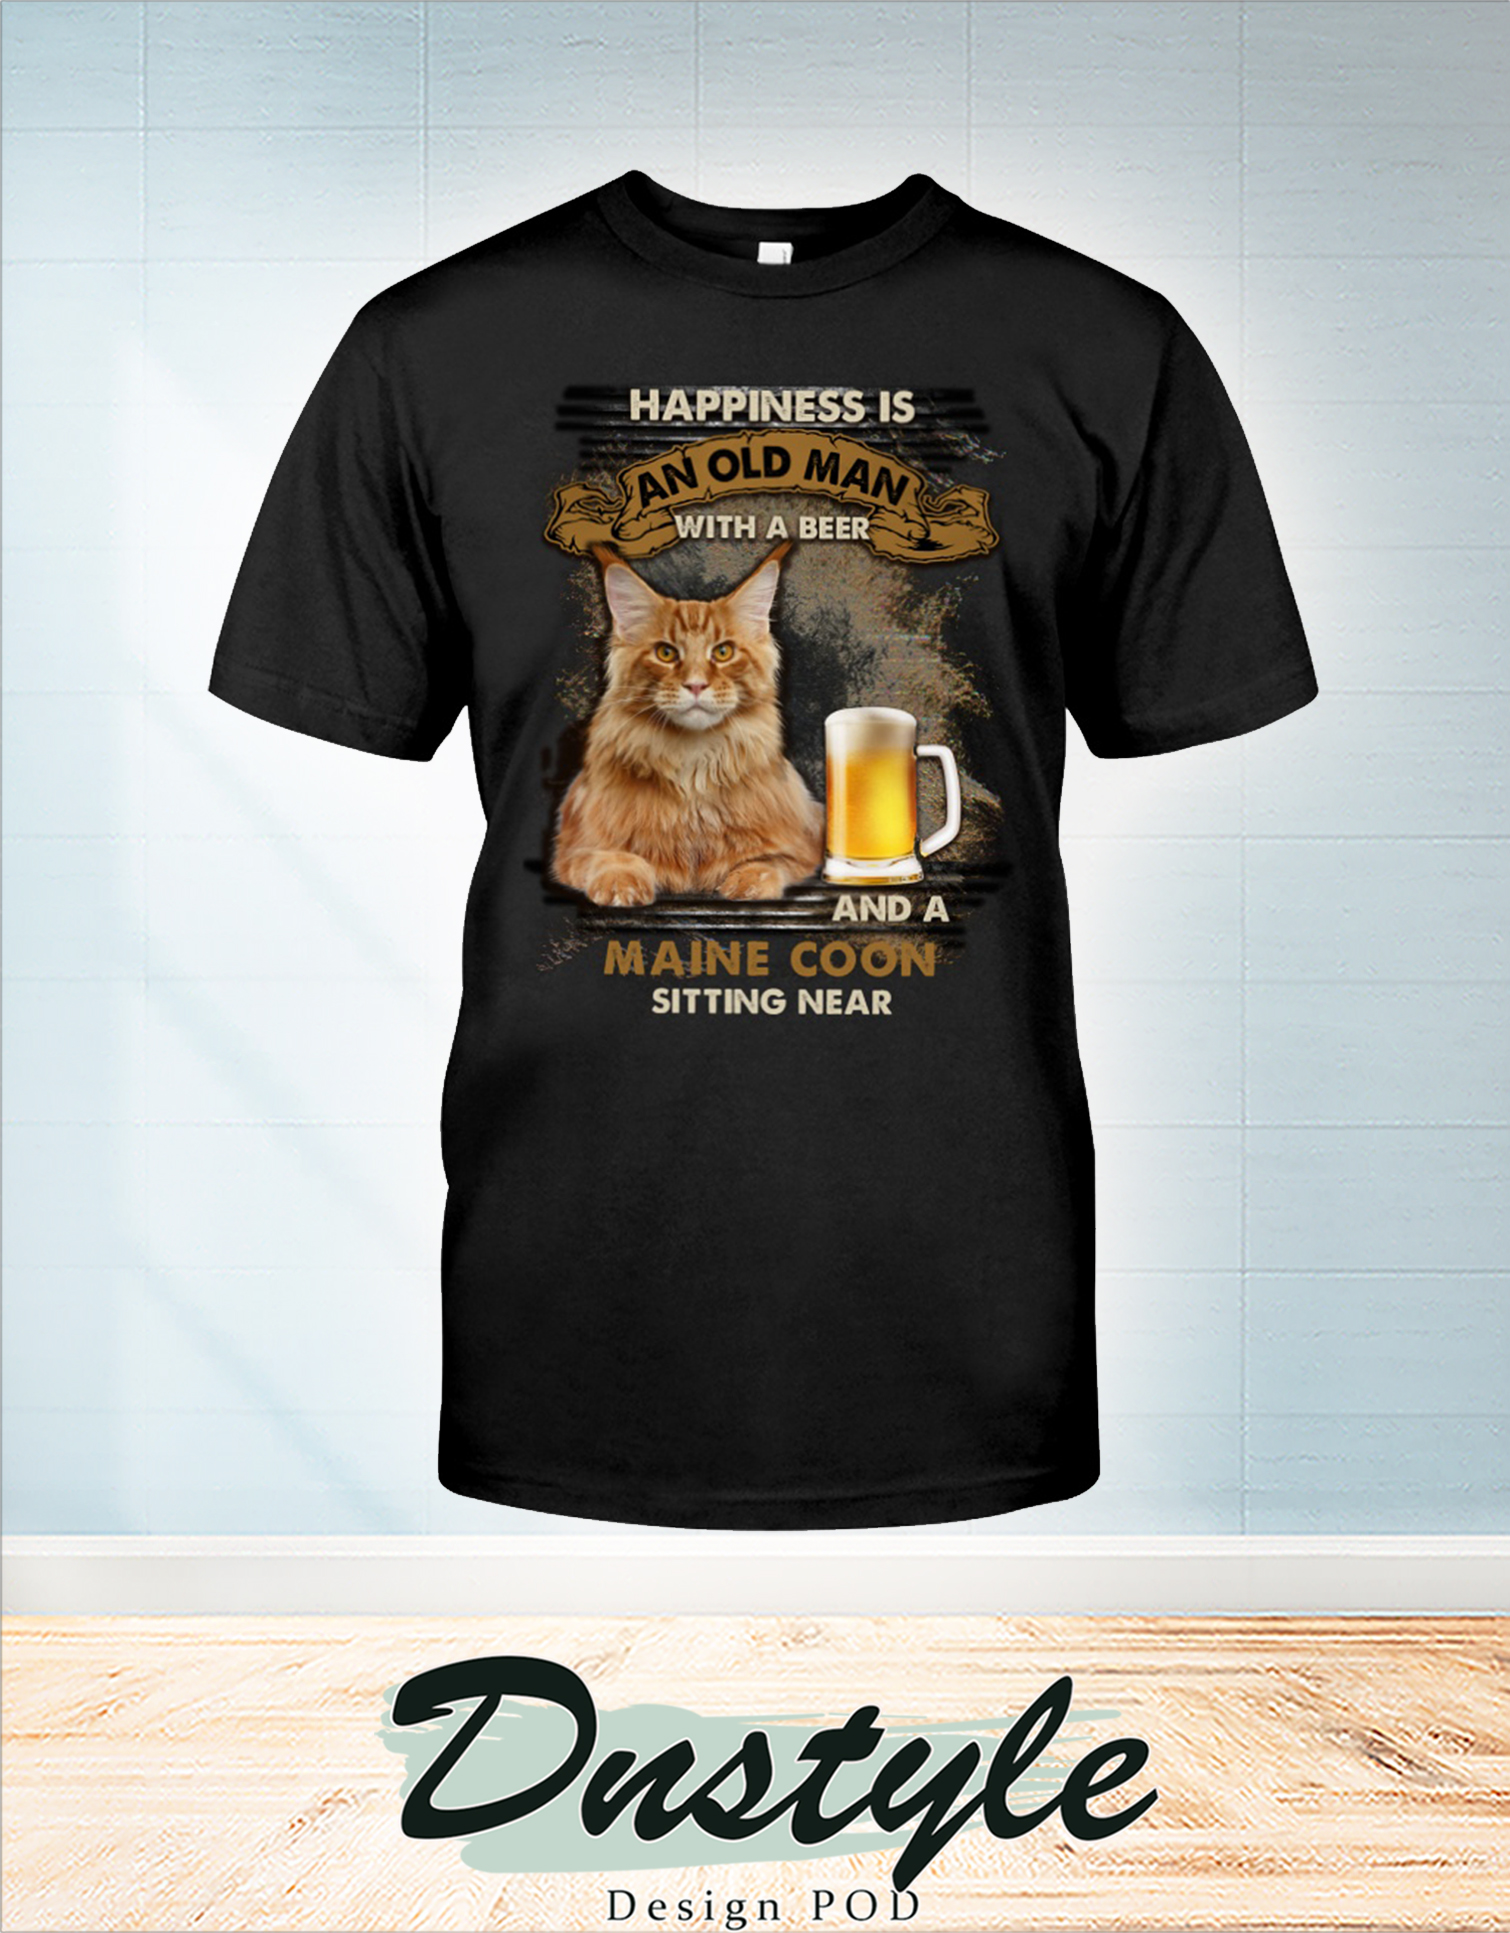 Happiness is an old man with a beer and a Maine Coon sitting near t-shirt